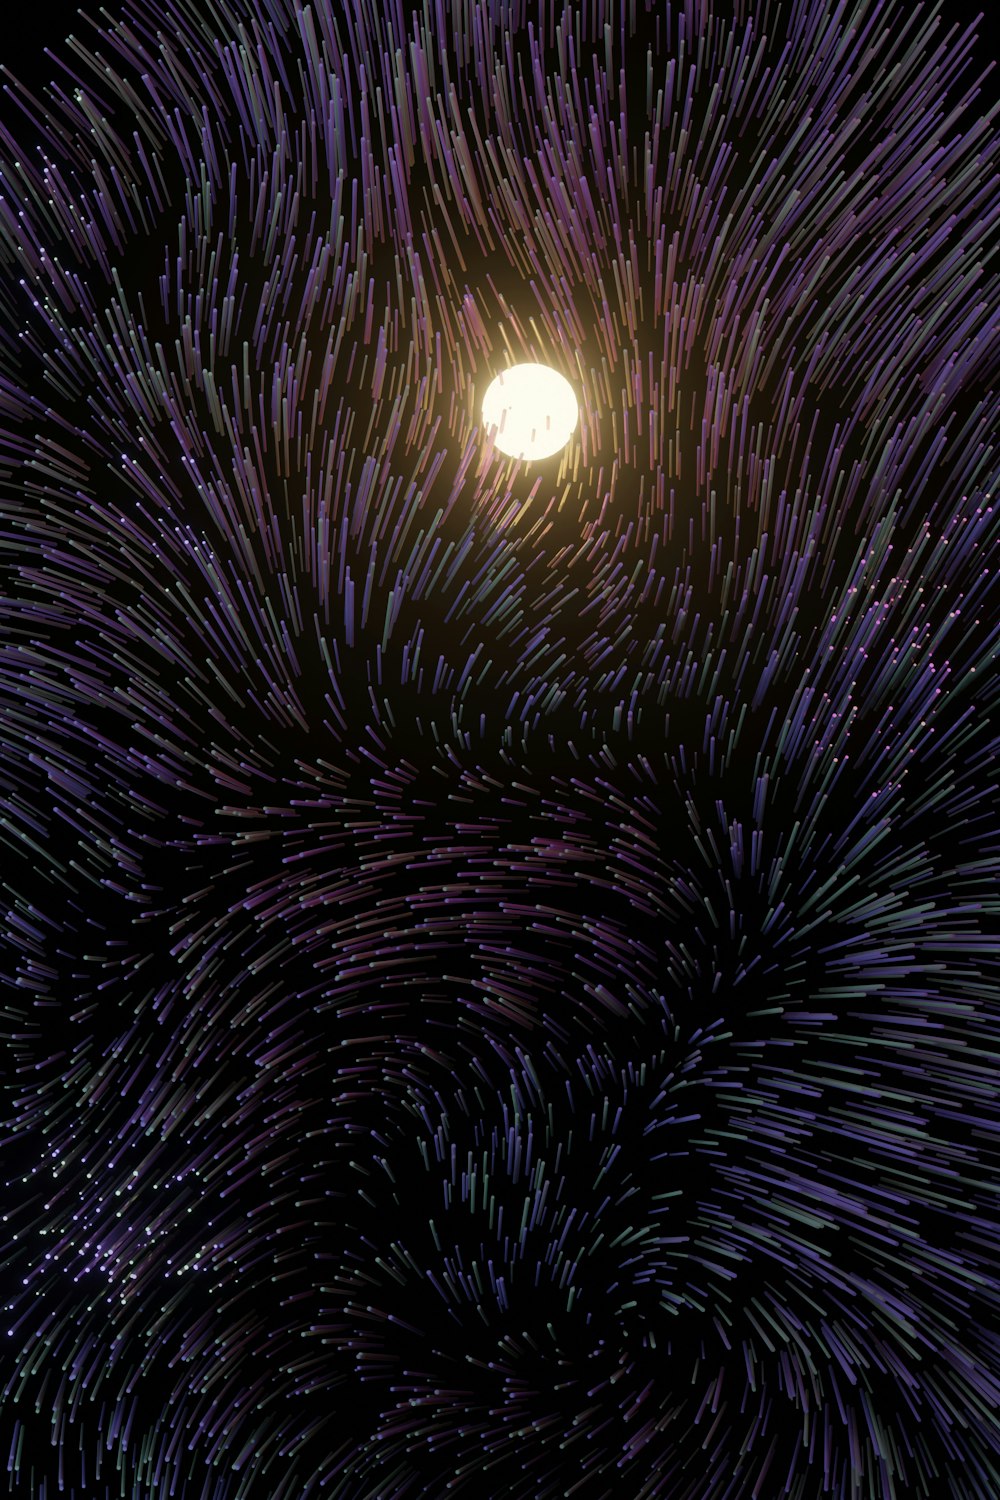 a full view of the night sky with a full moon